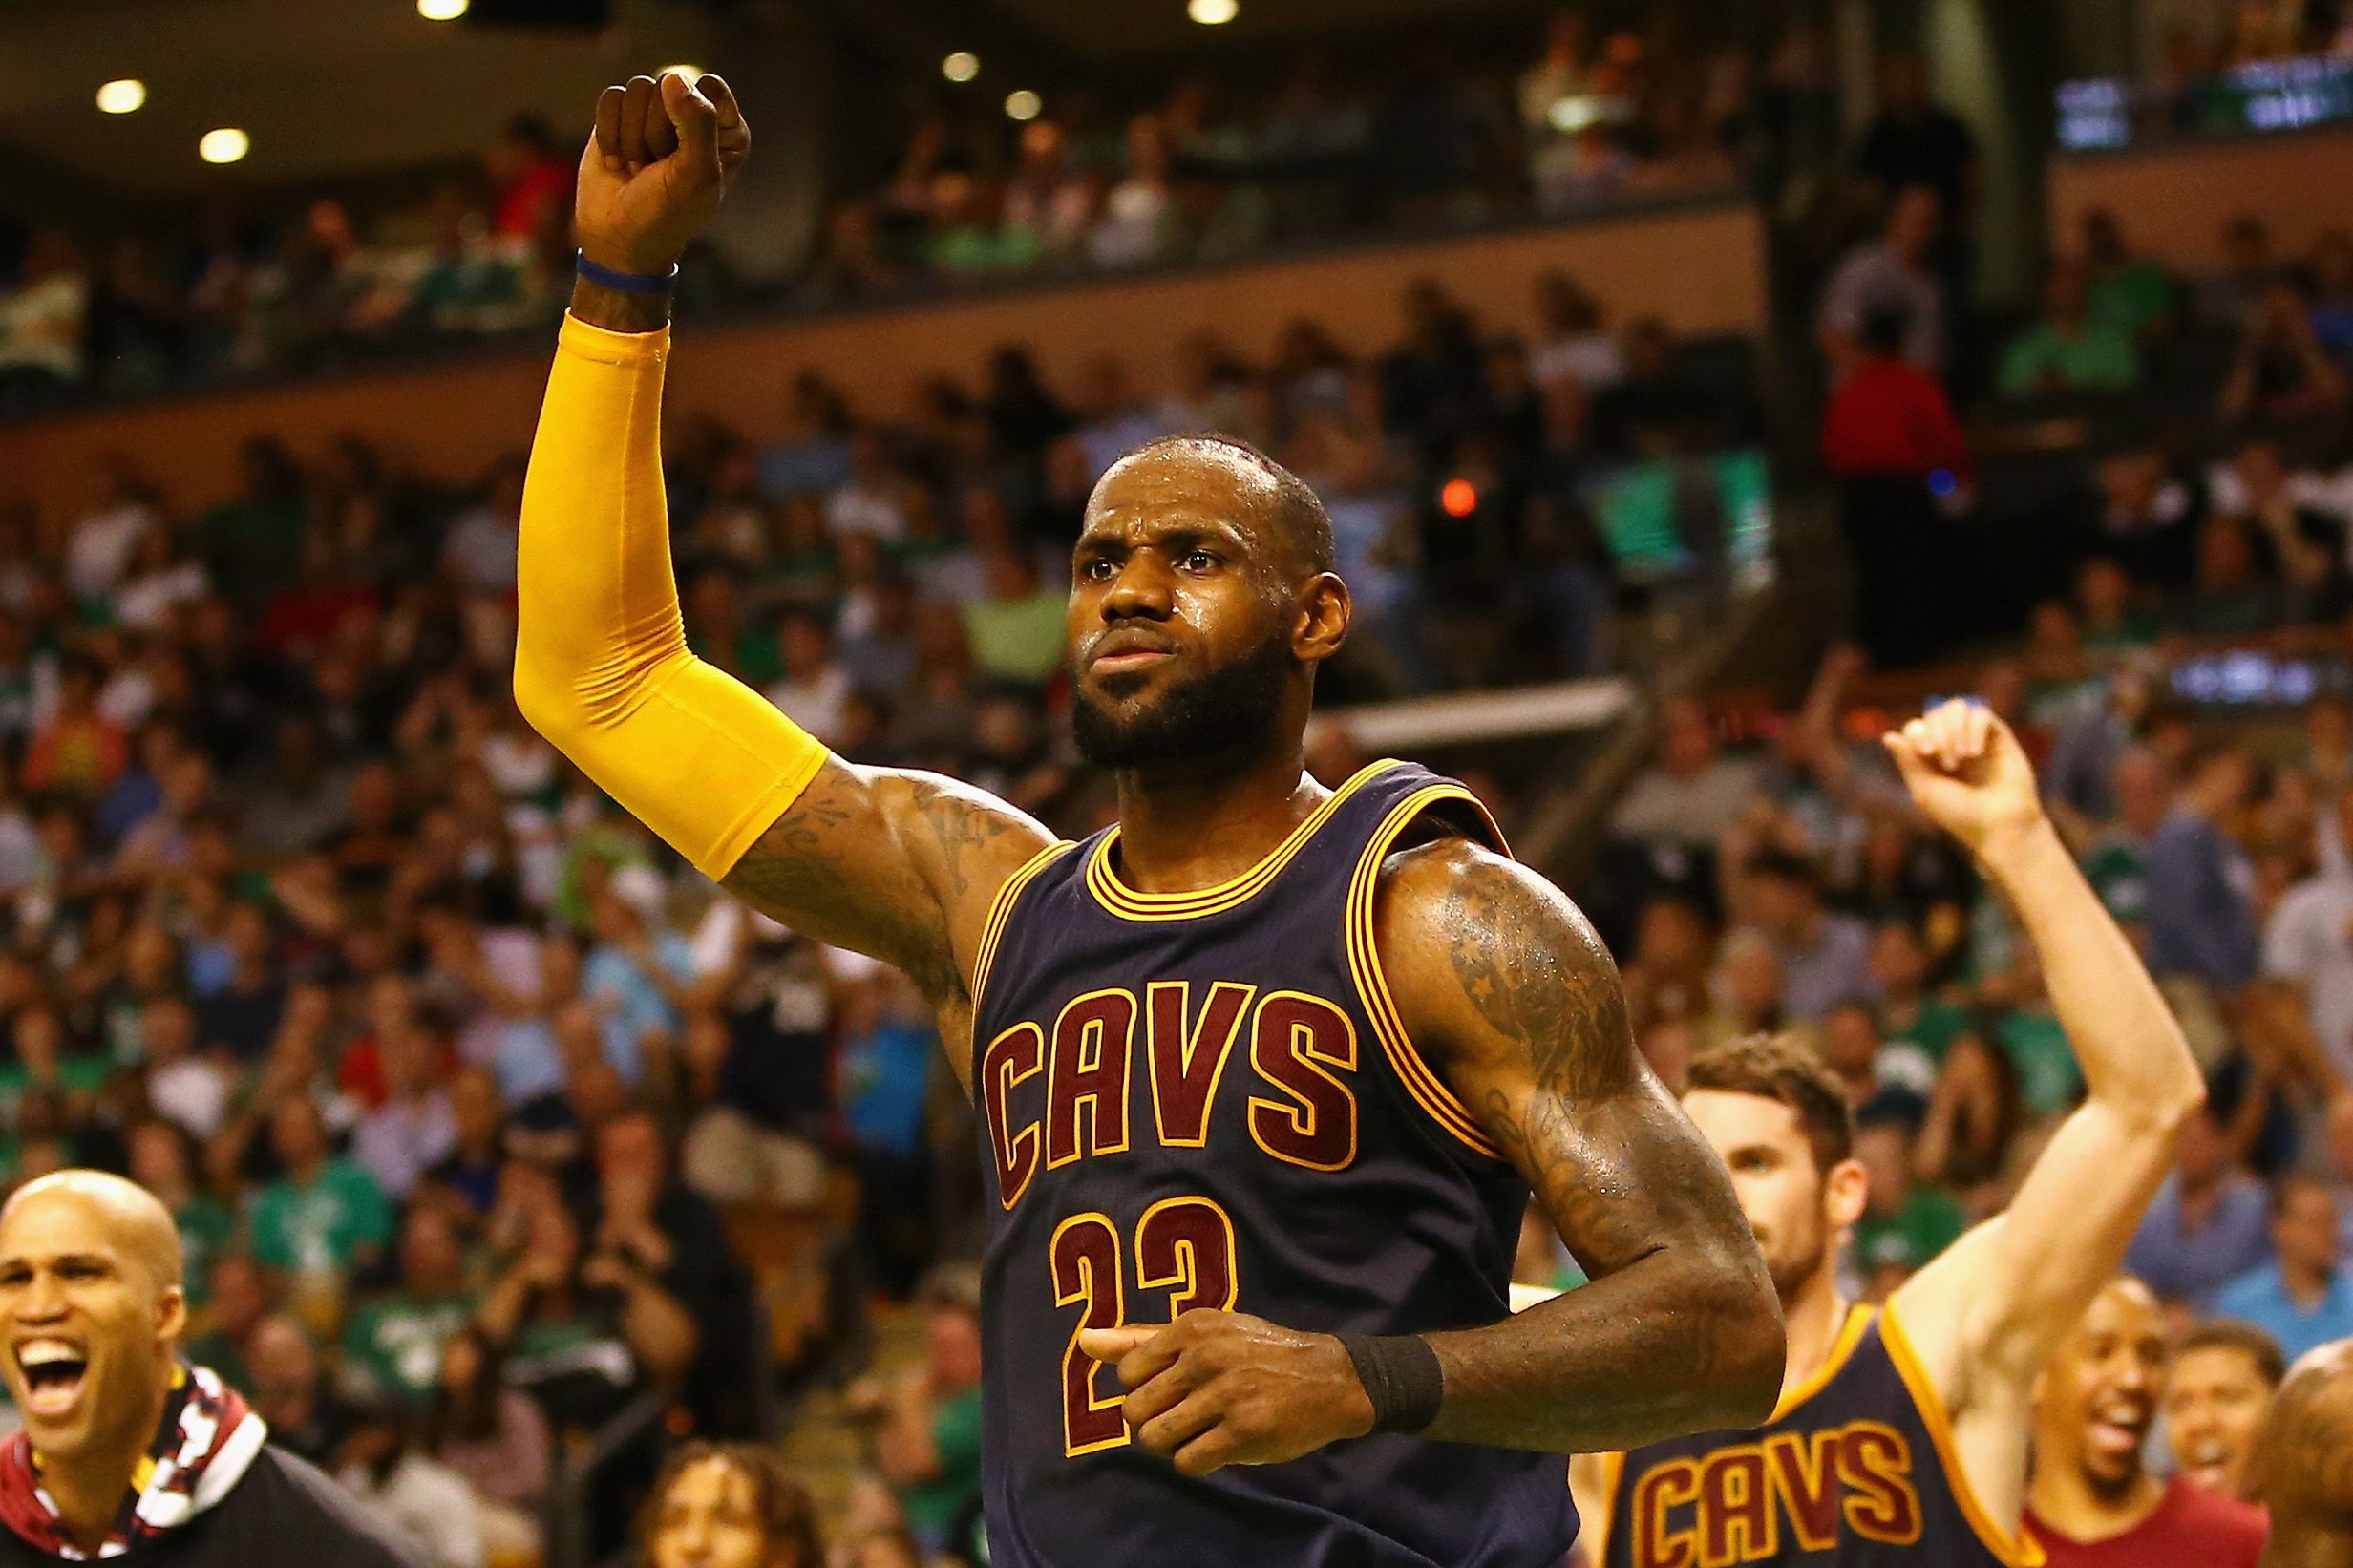 WATCH LeBron James Puts On Thrilling Performance During Exhibition Game In Manila